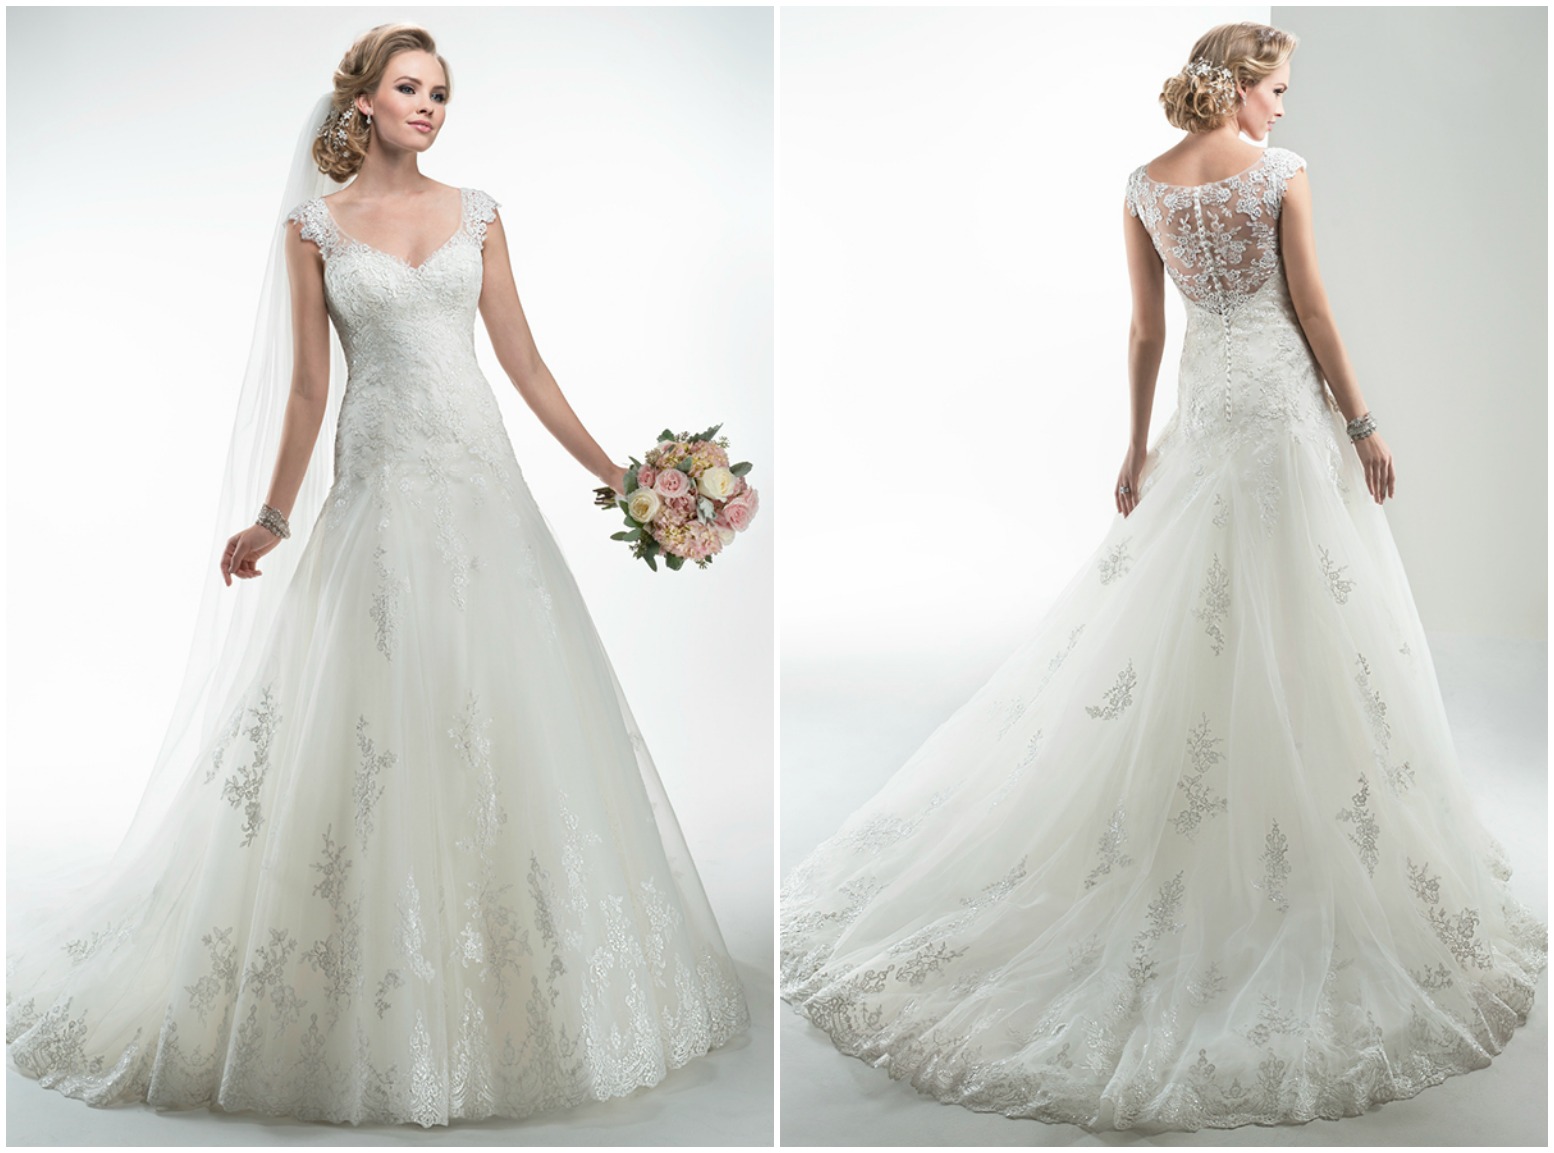 <a href="http://www.maggiesottero.com/dress.aspx?style=4MW012" target="_blank">Maggie Sottero</a>